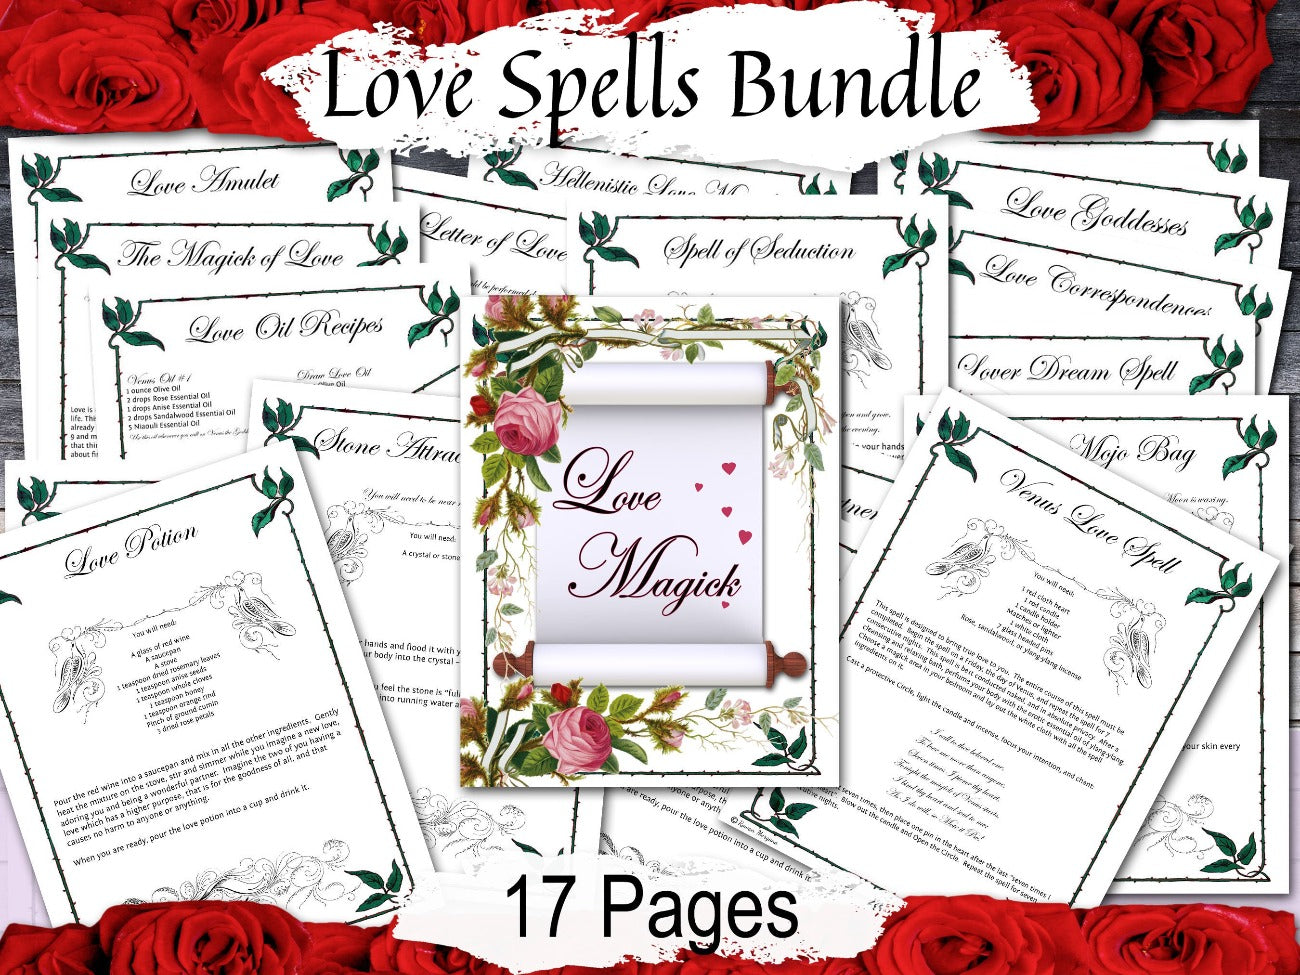 LOVE MAGIC BUNDLE 17 pages, Spells, Love Potions, Goddesses, Oils, Soul Mate, Lust and True Love, Witch Valentines Day Gift, Printable - Morgana Magick Spell